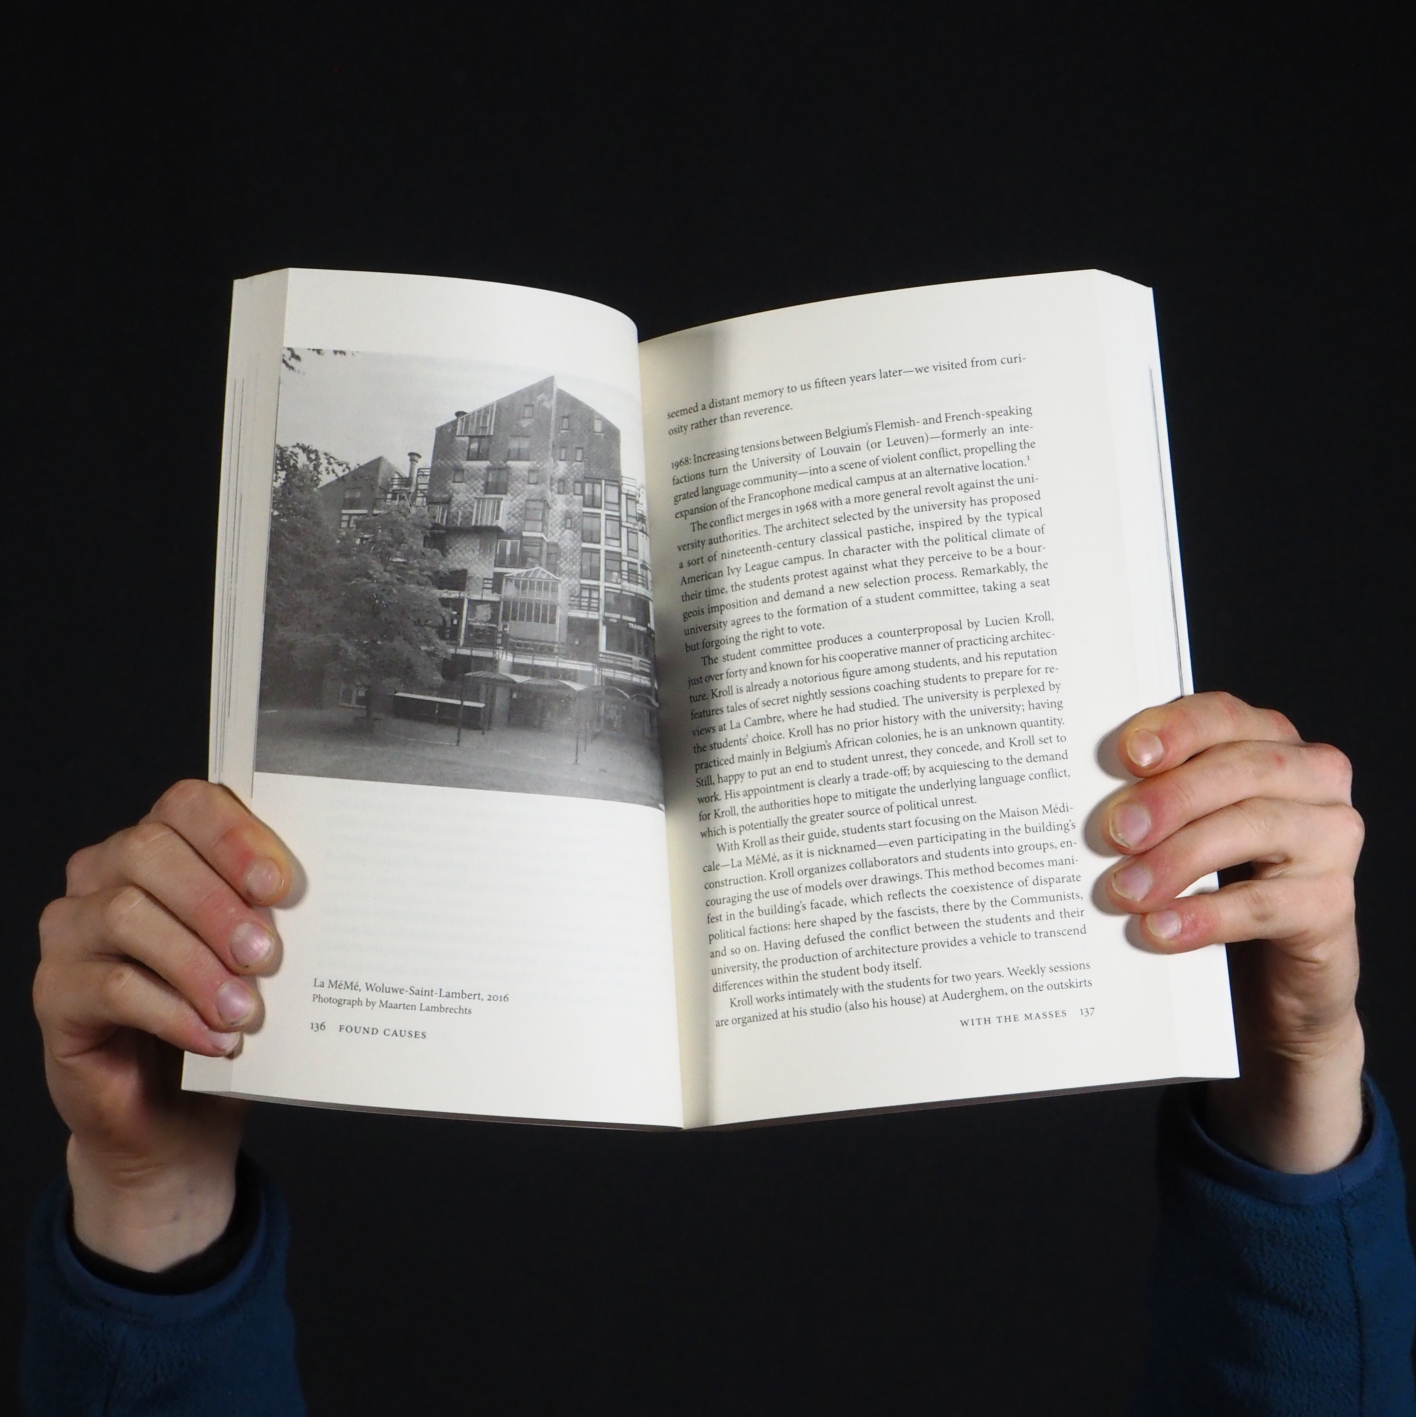 Book 'Four Walls and a Roof' by Reinier de Graaf